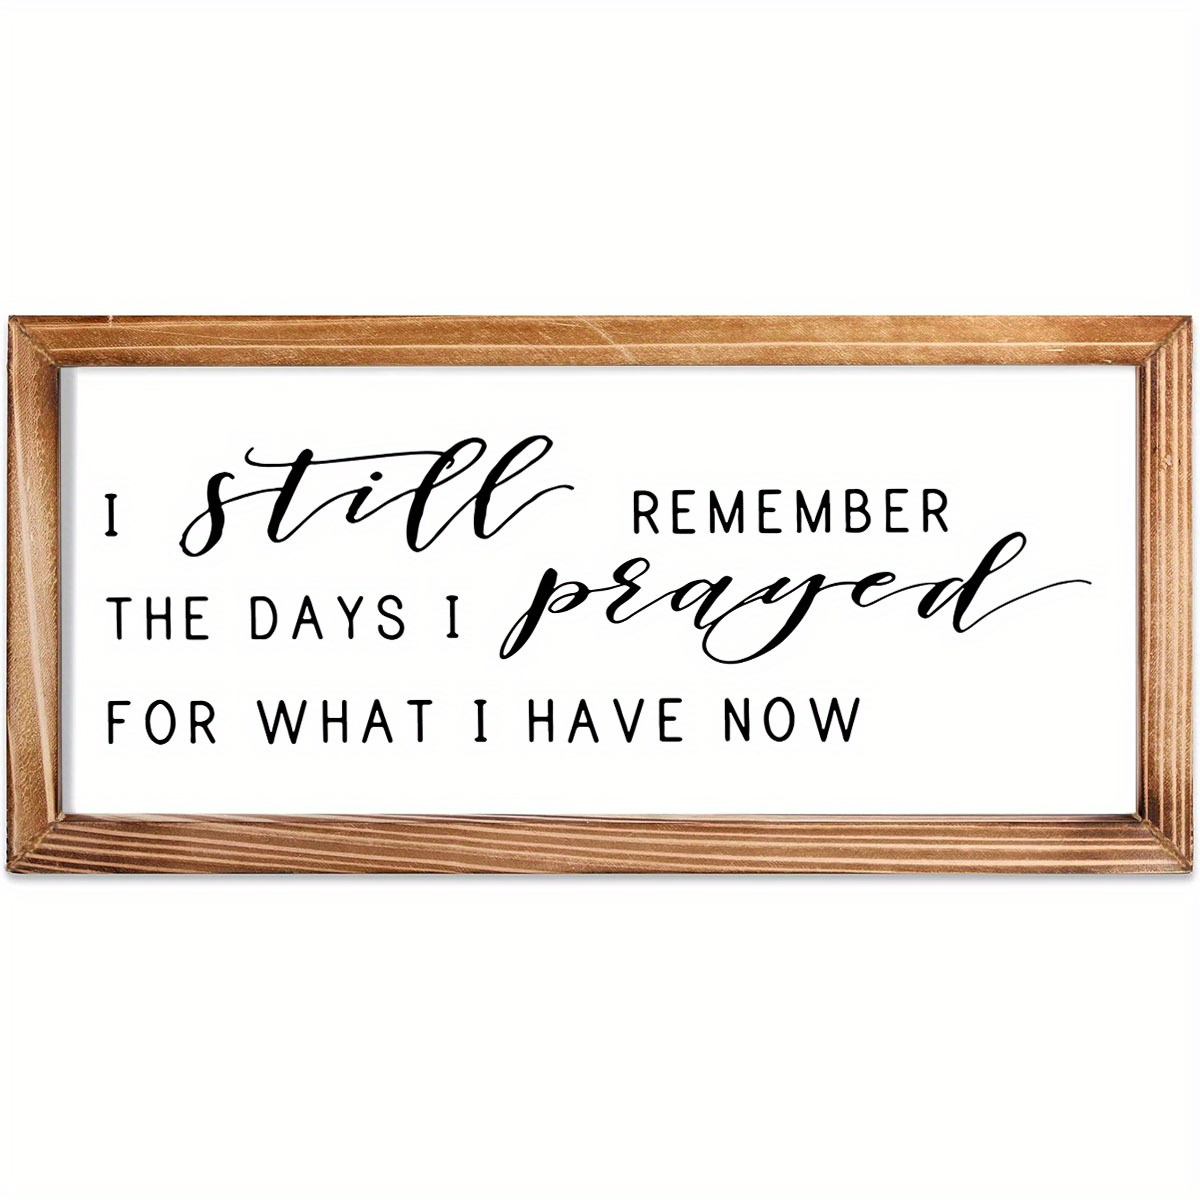 

1pc Rustic Wooden Family Sign, Contemporary Style Wall Art With Wood Frame, Inspirational Quote Home Decor For Kitchen, Living Room, Bathroom, Bedroom, Modern Rustic Wall Decor